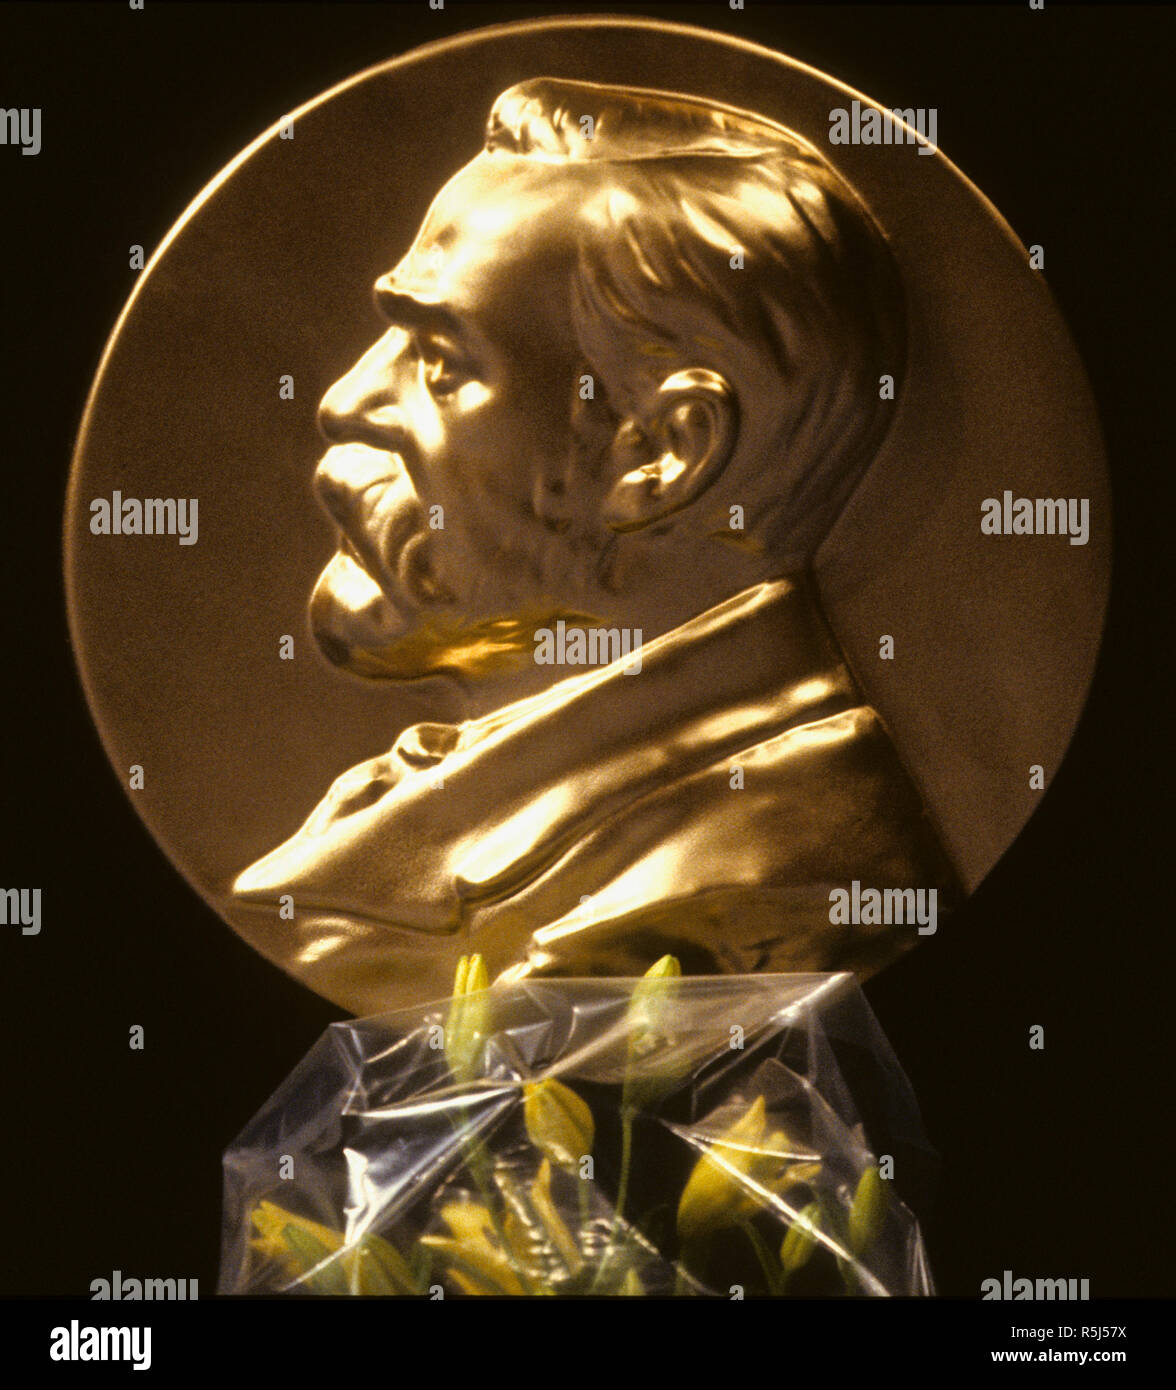 ALFRED NOBEL at a medallion on the podium at the Nobel Prize giving ceremony in Stockholm Consert hall Stock Photo